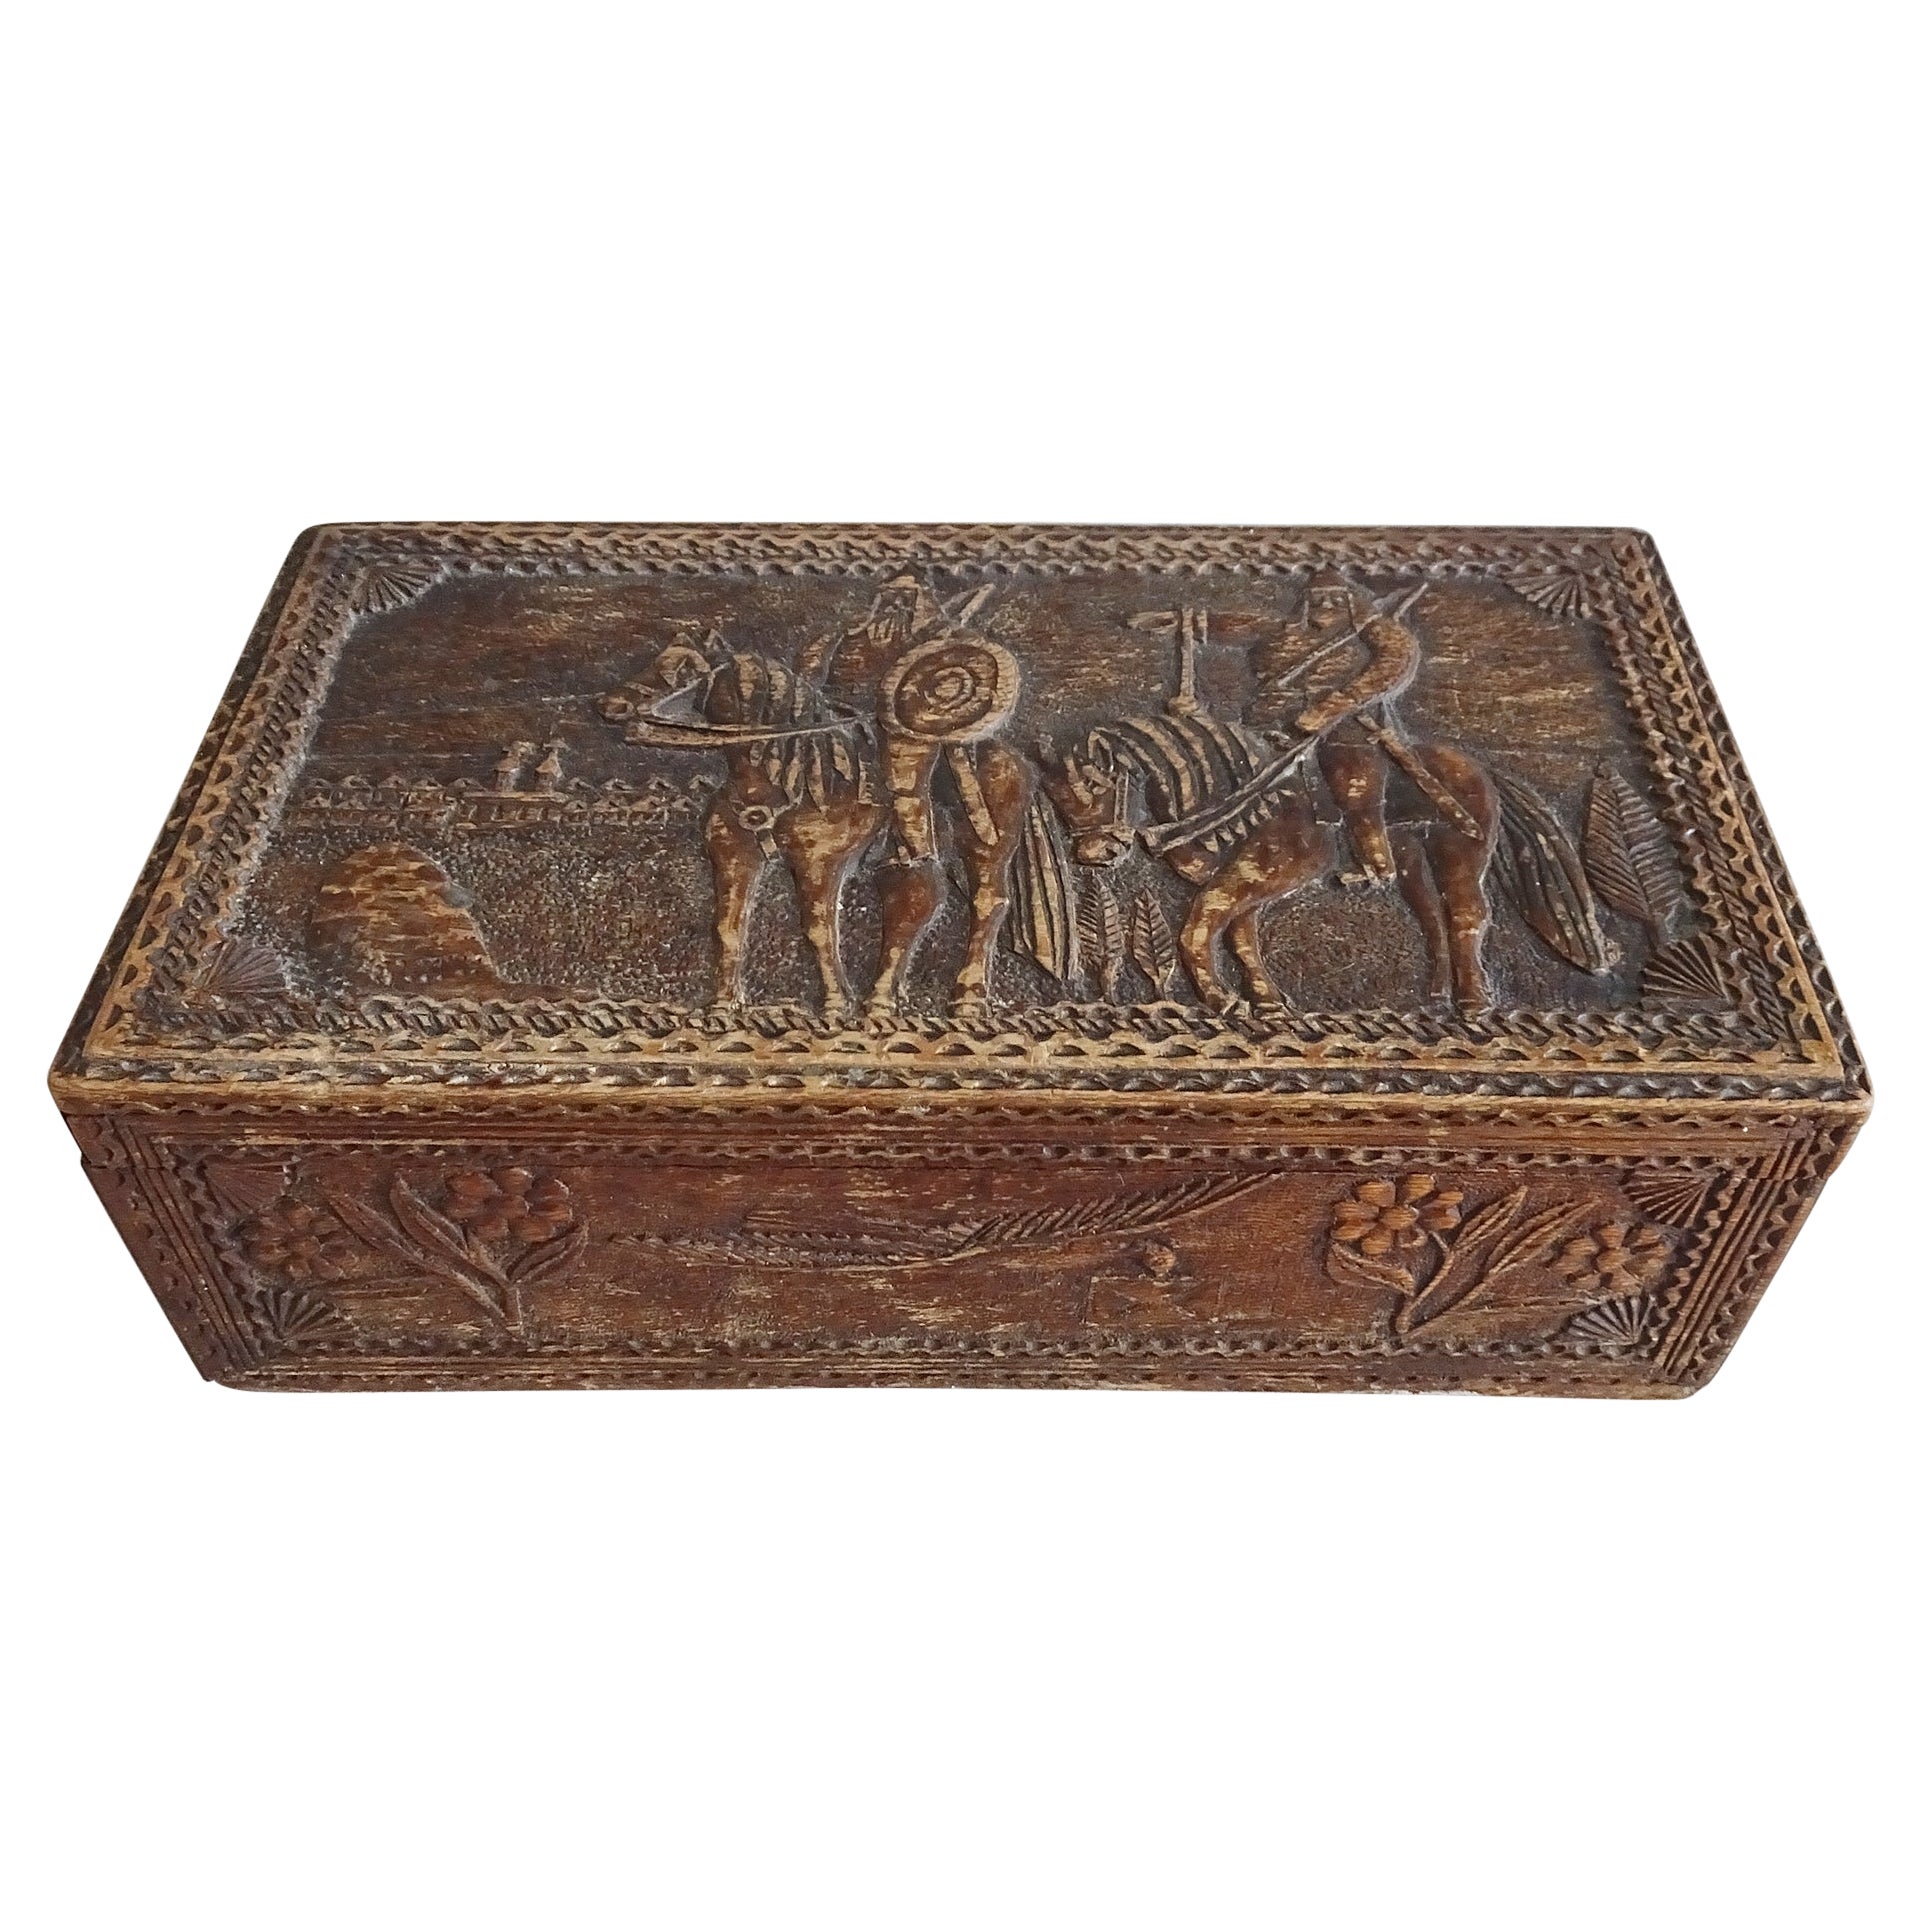 Antique Wooden Box Casket with Carved Historical Scenery, 1910